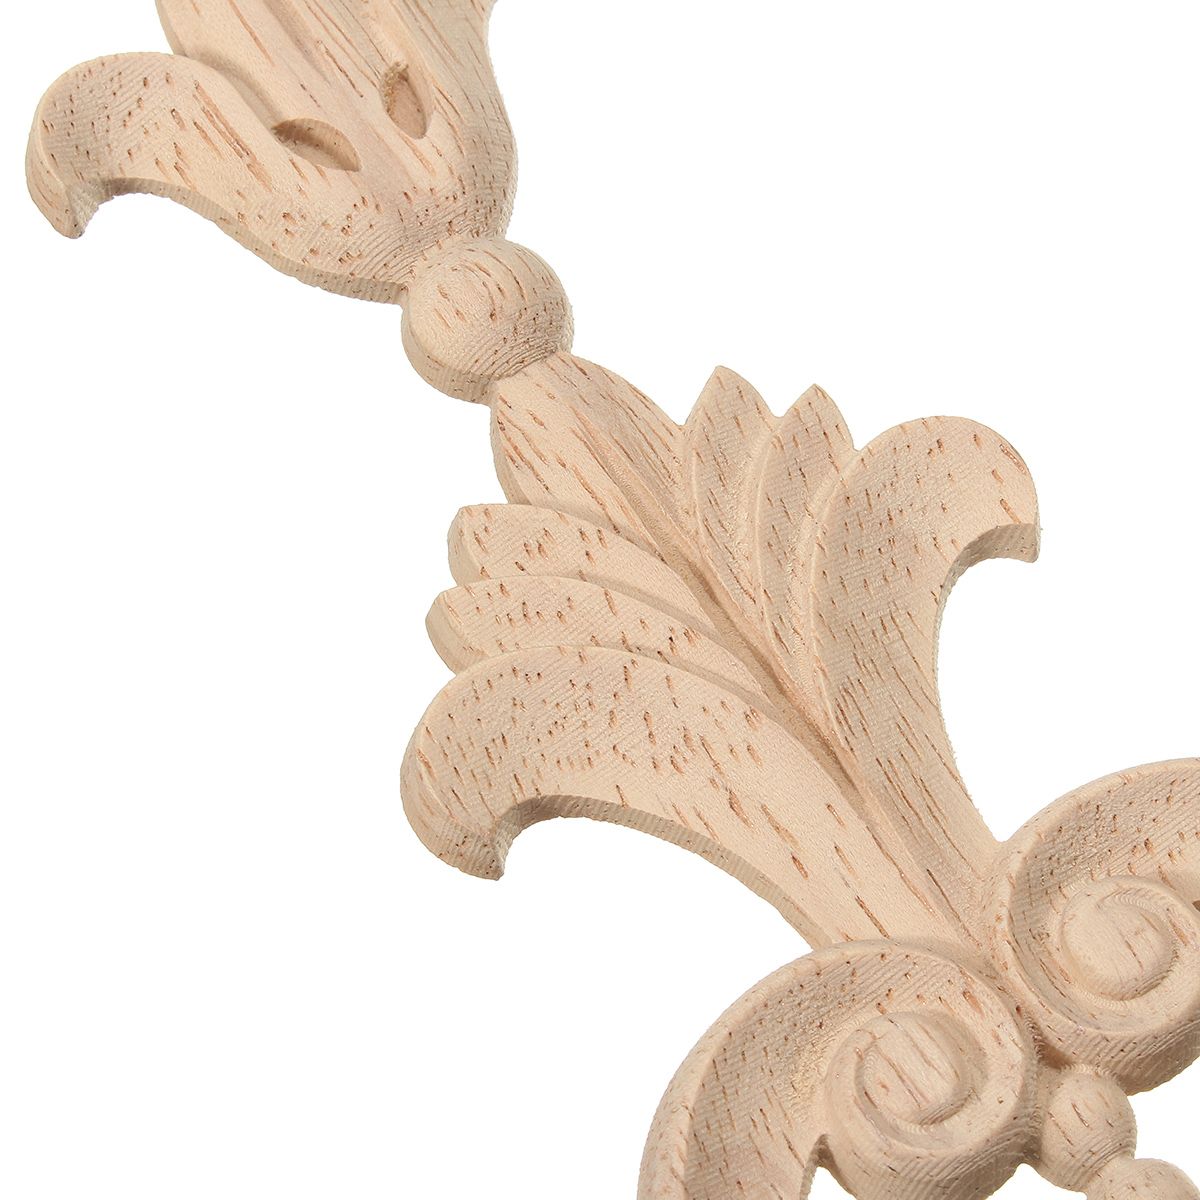 Wood-Carved-Applique-Frame-Onlay-Furniture-Decoration-Unpainted-360x70x8mm-1143652